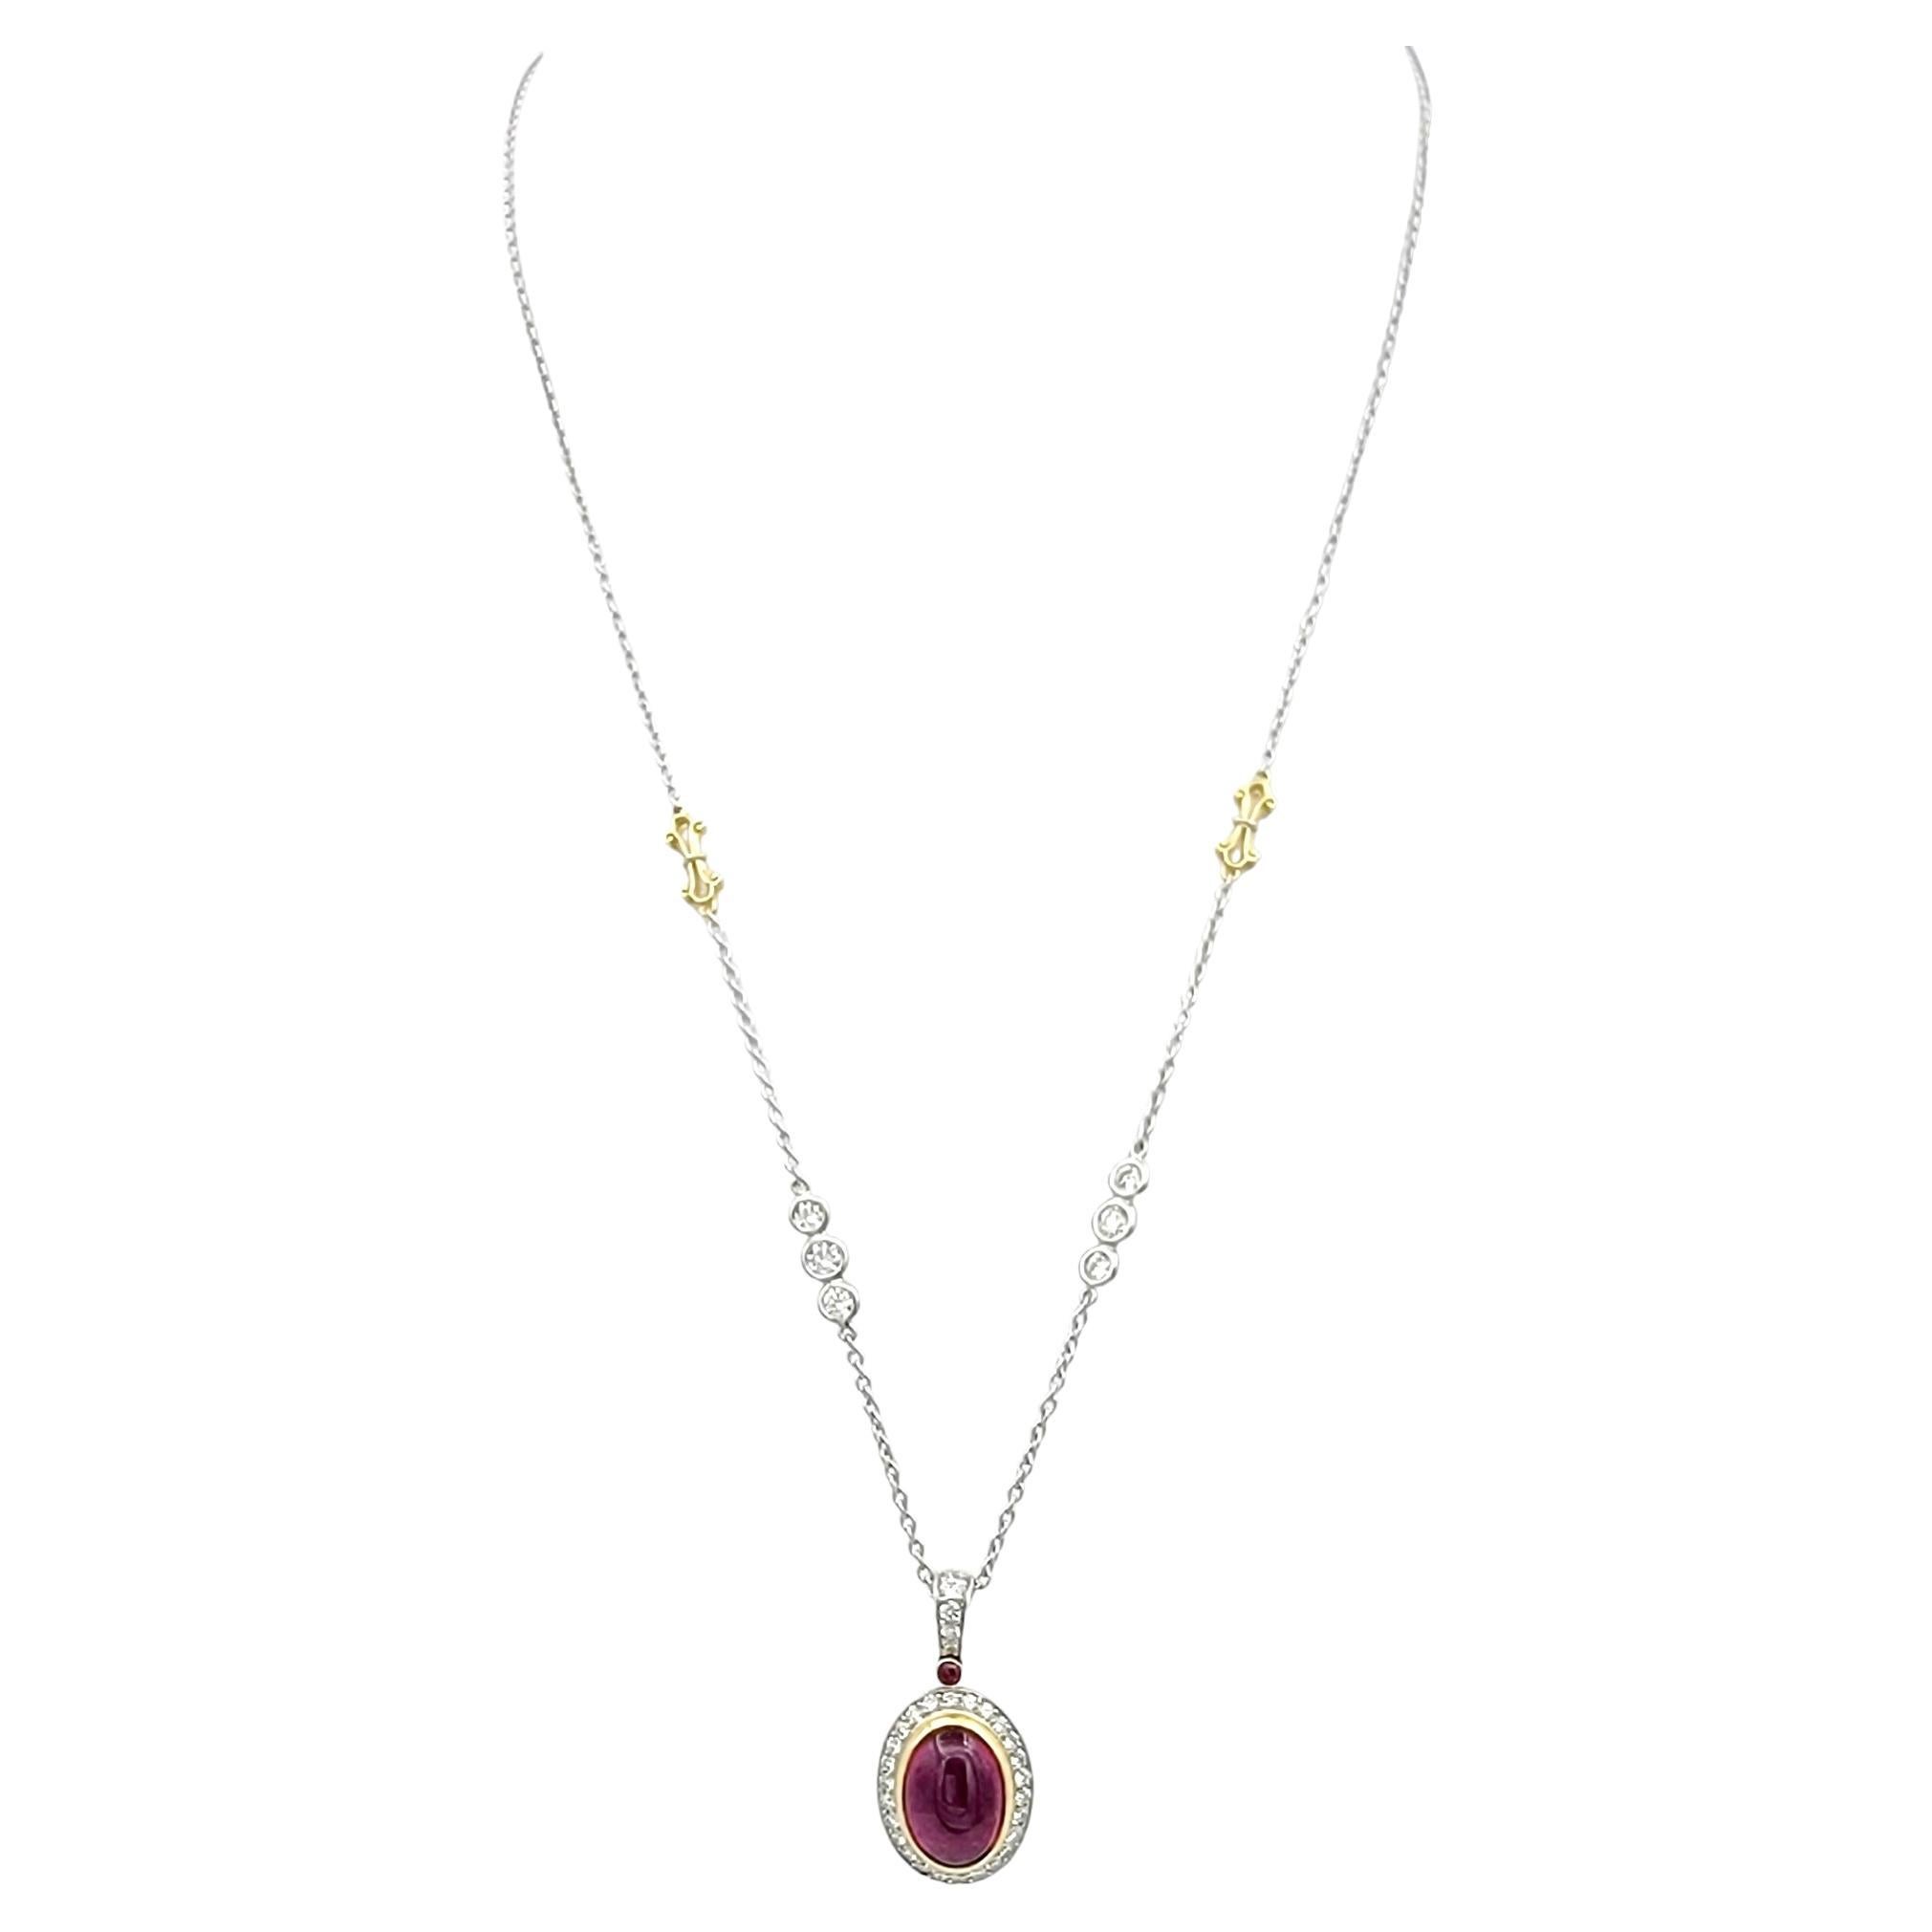 This pendant necklace by esteemed designer, Jack Kelege, is a stunning display of shimmer and exquisite design. The focal point is an oval cabochon pink tourmaline, bezel-set in rich 18-karat yellow gold, creating a warm and captivating centerpiece.